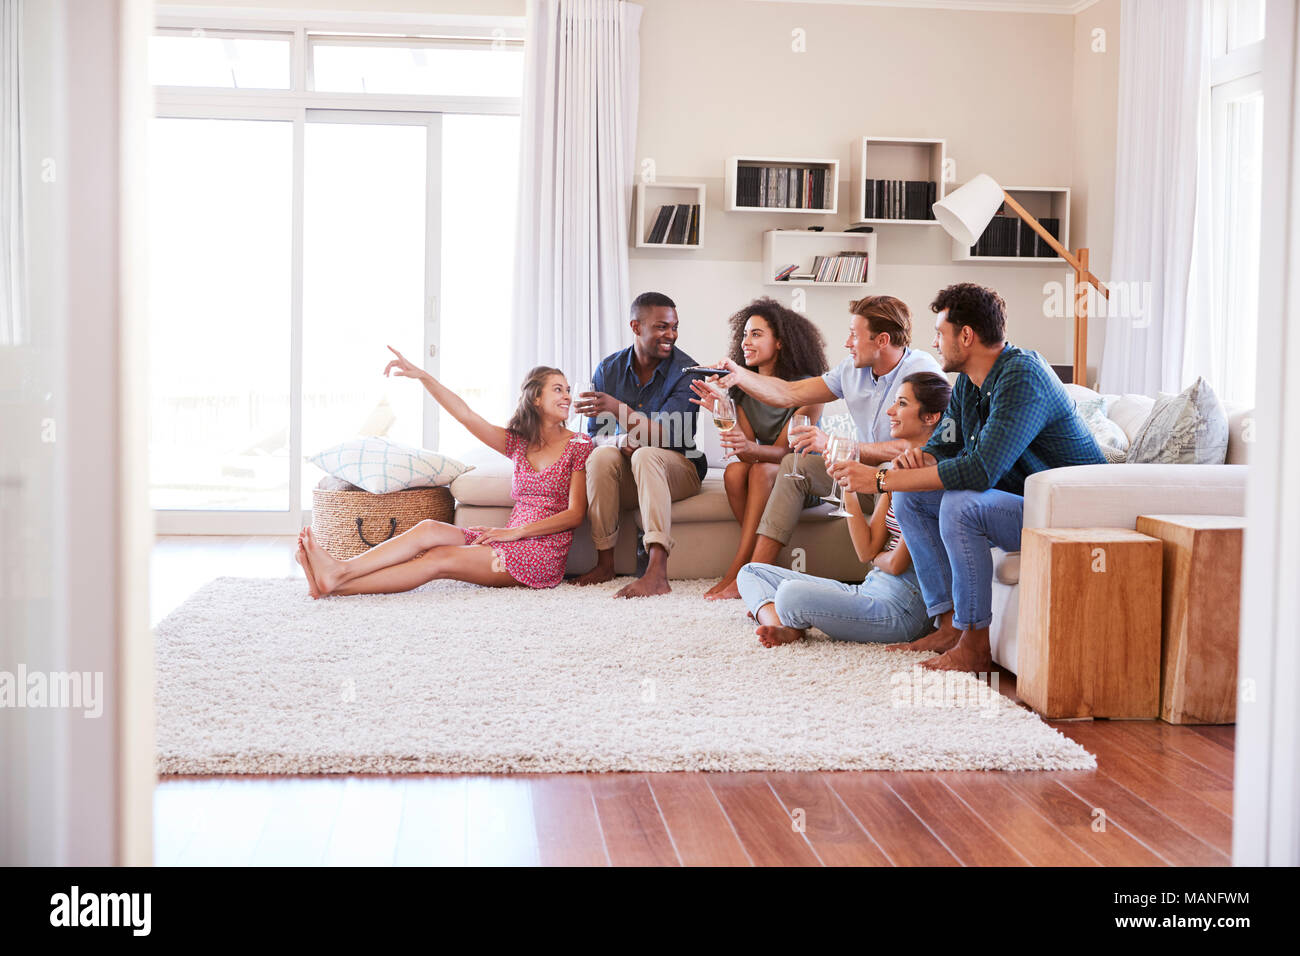 Group Of Friends Relaxing At Home Watching TV Together Stock Photo